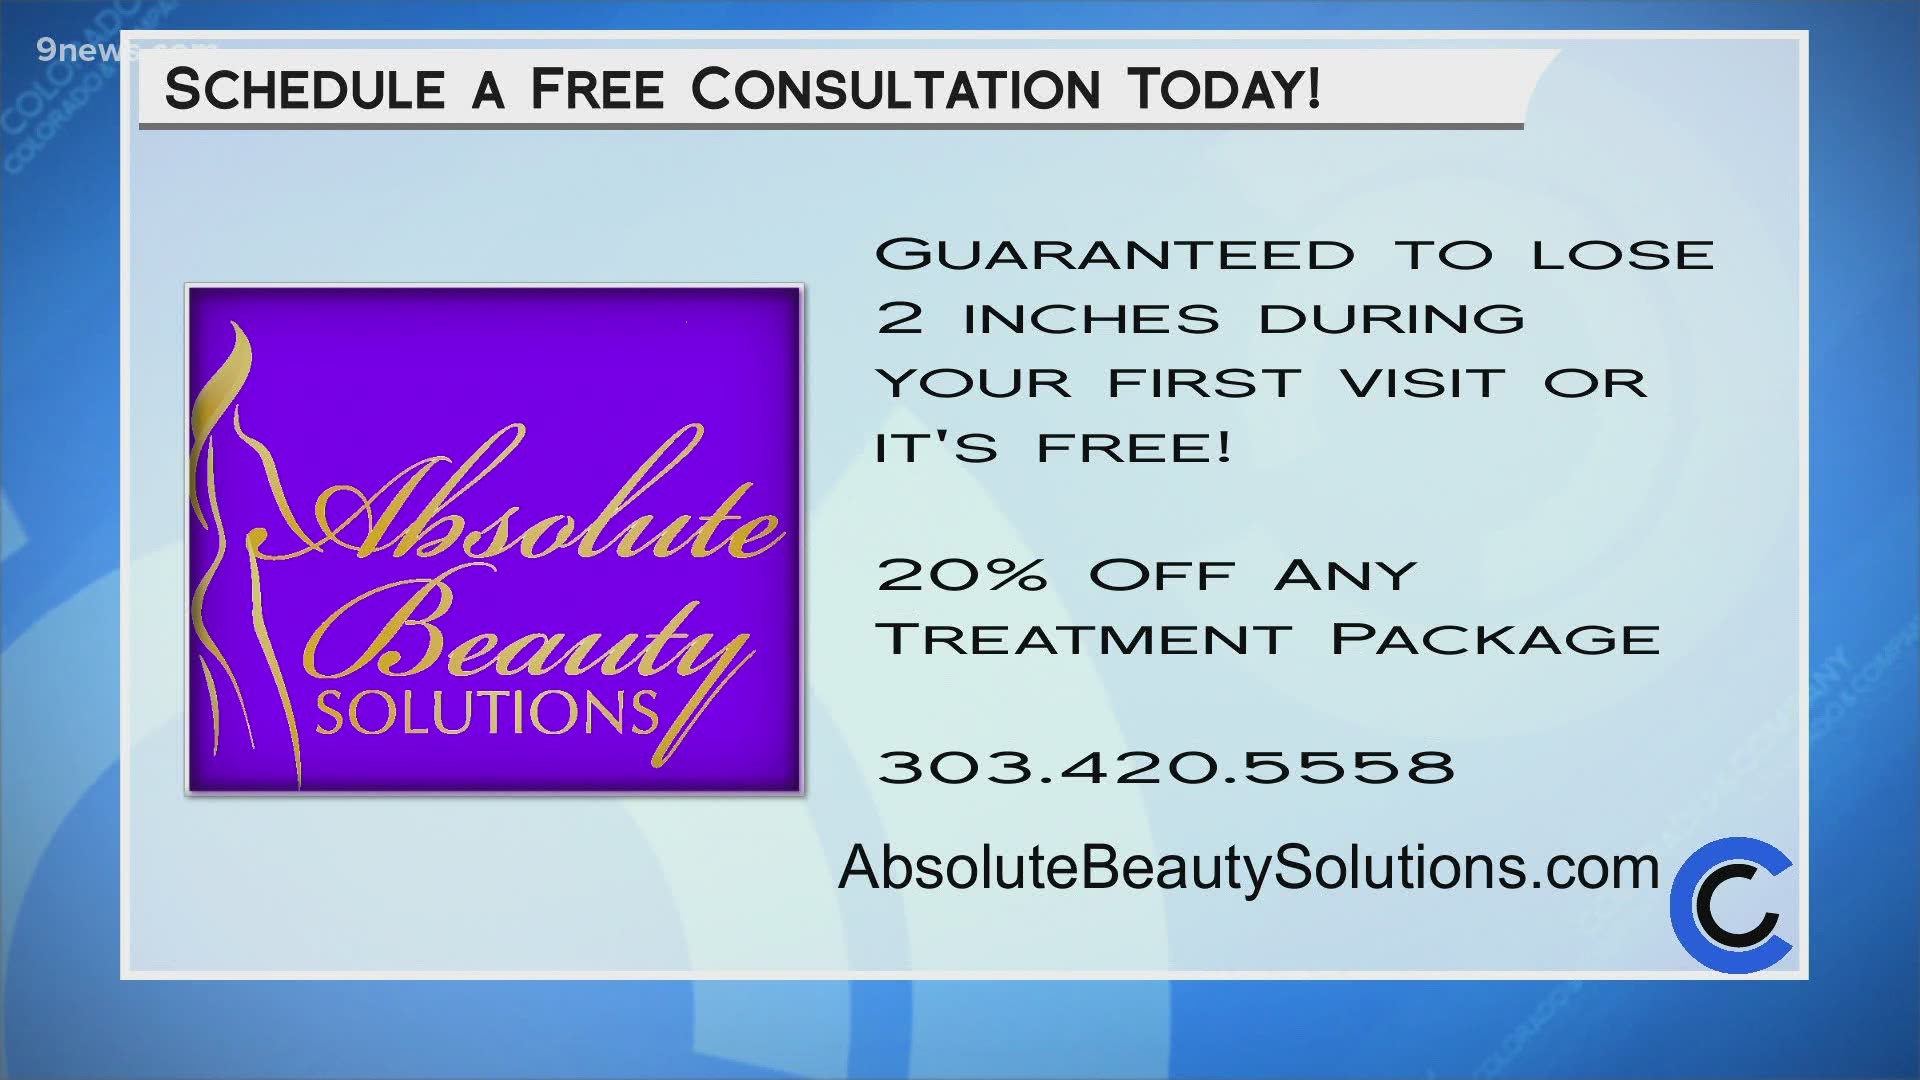 Save 20% on any treatment package! Learn more at AbsoluteBeautySolutions.com or call 303.420.5558. Get the figure you've always wanted with help from Ultra Slim.